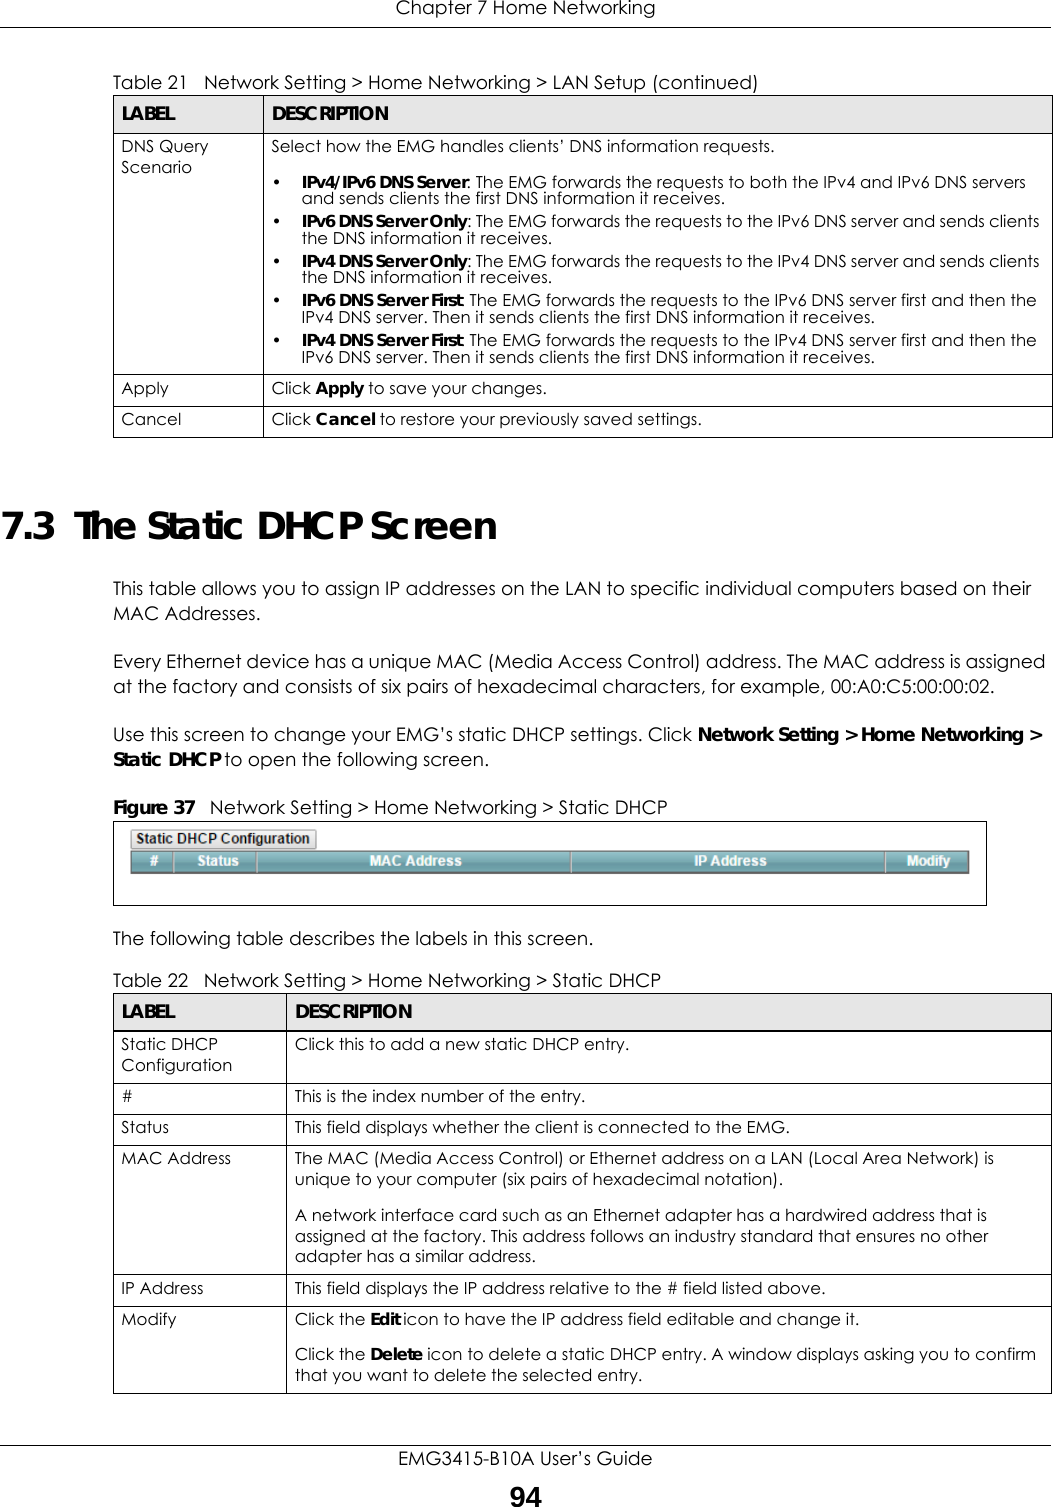 Chapter 7 Home NetworkingEMG3415-B10A User’s Guide947.3  The Static DHCP ScreenThis table allows you to assign IP addresses on the LAN to specific individual computers based on their MAC Addresses. Every Ethernet device has a unique MAC (Media Access Control) address. The MAC address is assigned at the factory and consists of six pairs of hexadecimal characters, for example, 00:A0:C5:00:00:02.Use this screen to change your EMG’s static DHCP settings. Click Network Setting &gt; Home Networking &gt; Static DHCP to open the following screen.Figure 37   Network Setting &gt; Home Networking &gt; Static DHCP The following table describes the labels in this screen.DNS Query ScenarioSelect how the EMG handles clients’ DNS information requests.•IPv4/IPv6 DNS Server: The EMG forwards the requests to both the IPv4 and IPv6 DNS servers and sends clients the first DNS information it receives.•IPv6 DNS Server Only: The EMG forwards the requests to the IPv6 DNS server and sends clients the DNS information it receives. •IPv4 DNS Server Only: The EMG forwards the requests to the IPv4 DNS server and sends clients the DNS information it receives.•IPv6 DNS Server First: The EMG forwards the requests to the IPv6 DNS server first and then the IPv4 DNS server. Then it sends clients the first DNS information it receives.•IPv4 DNS Server First: The EMG forwards the requests to the IPv4 DNS server first and then the IPv6 DNS server. Then it sends clients the first DNS information it receives.Apply Click Apply to save your changes.Cancel Click Cancel to restore your previously saved settings.Table 21   Network Setting &gt; Home Networking &gt; LAN Setup (continued)LABEL DESCRIPTIONTable 22   Network Setting &gt; Home Networking &gt; Static DHCPLABEL DESCRIPTIONStatic DHCP ConfigurationClick this to add a new static DHCP entry. # This is the index number of the entry.Status This field displays whether the client is connected to the EMG.MAC Address The MAC (Media Access Control) or Ethernet address on a LAN (Local Area Network) is unique to your computer (six pairs of hexadecimal notation).A network interface card such as an Ethernet adapter has a hardwired address that is assigned at the factory. This address follows an industry standard that ensures no other adapter has a similar address.IP Address This field displays the IP address relative to the # field listed above.Modify Click the Edit icon to have the IP address field editable and change it.Click the Delete icon to delete a static DHCP entry. A window displays asking you to confirm that you want to delete the selected entry.